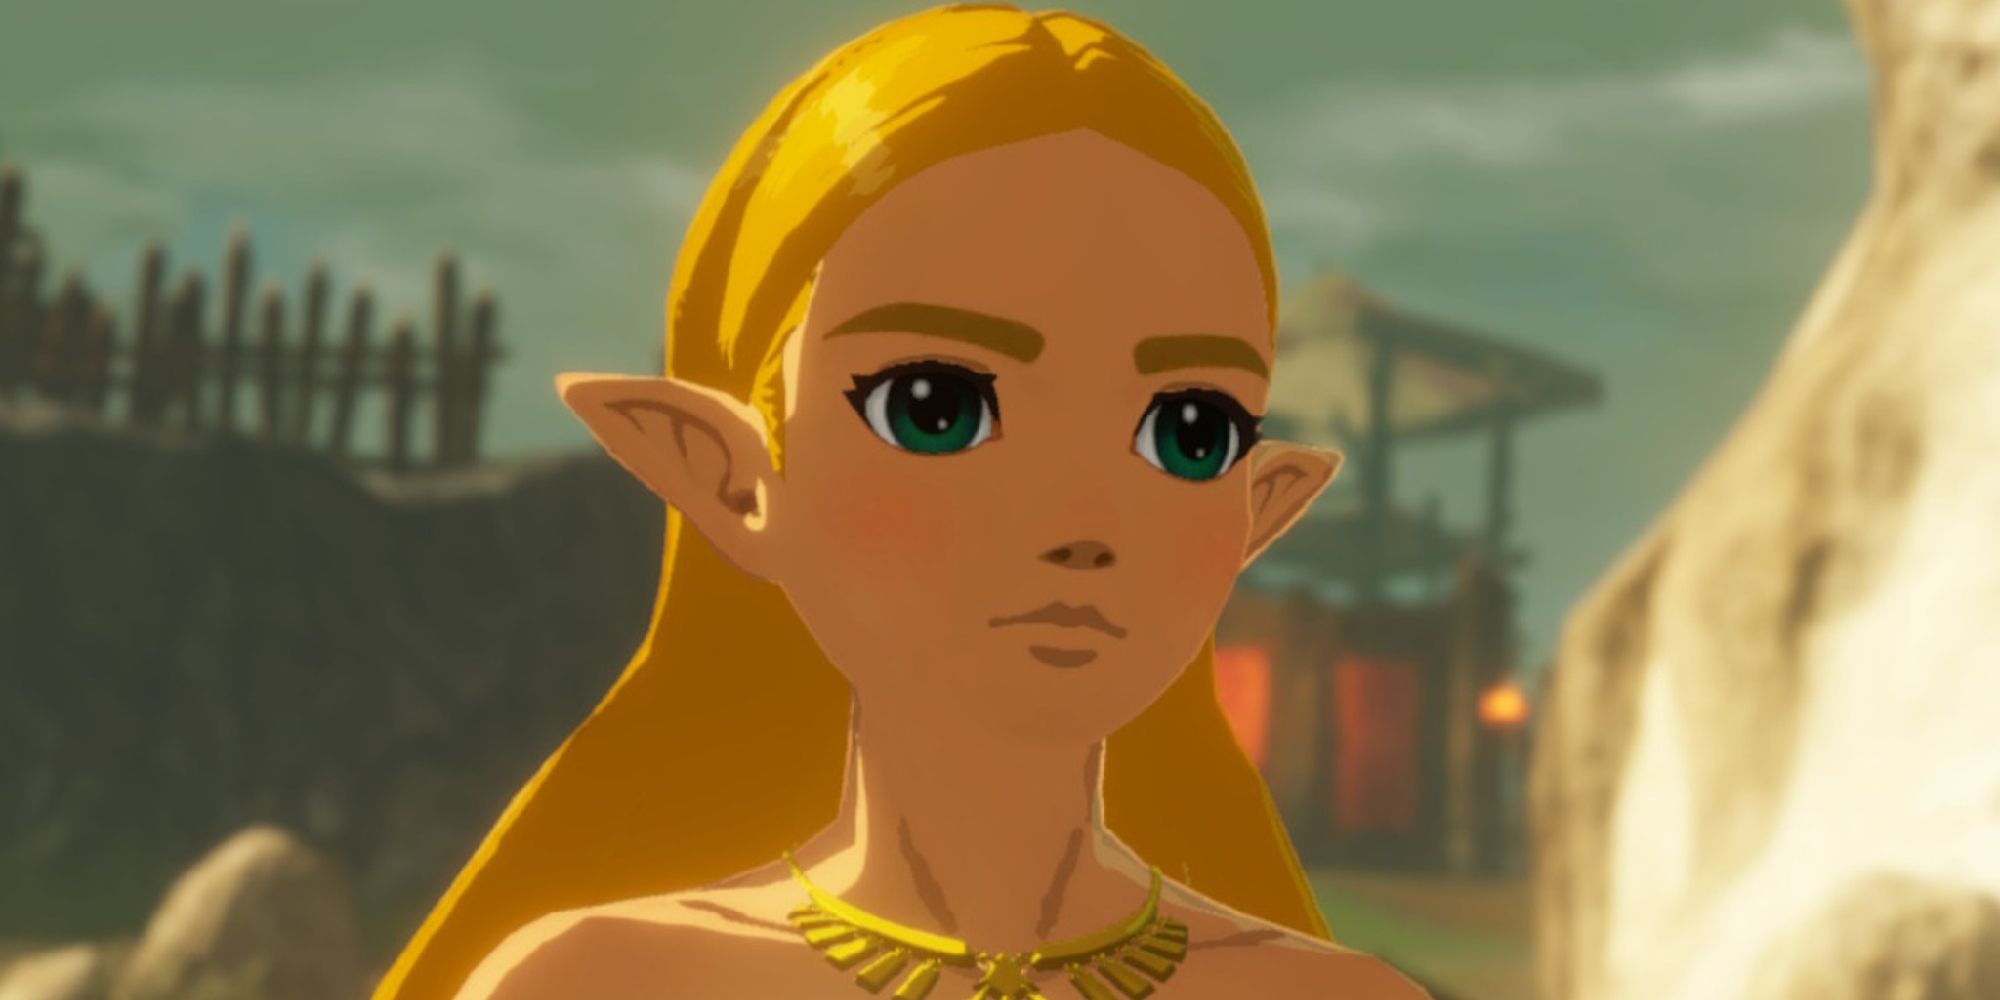 Close-up of the blonde titular Princess with a determined expression on her face, glimpses of what appear to be a stronghold behind her.